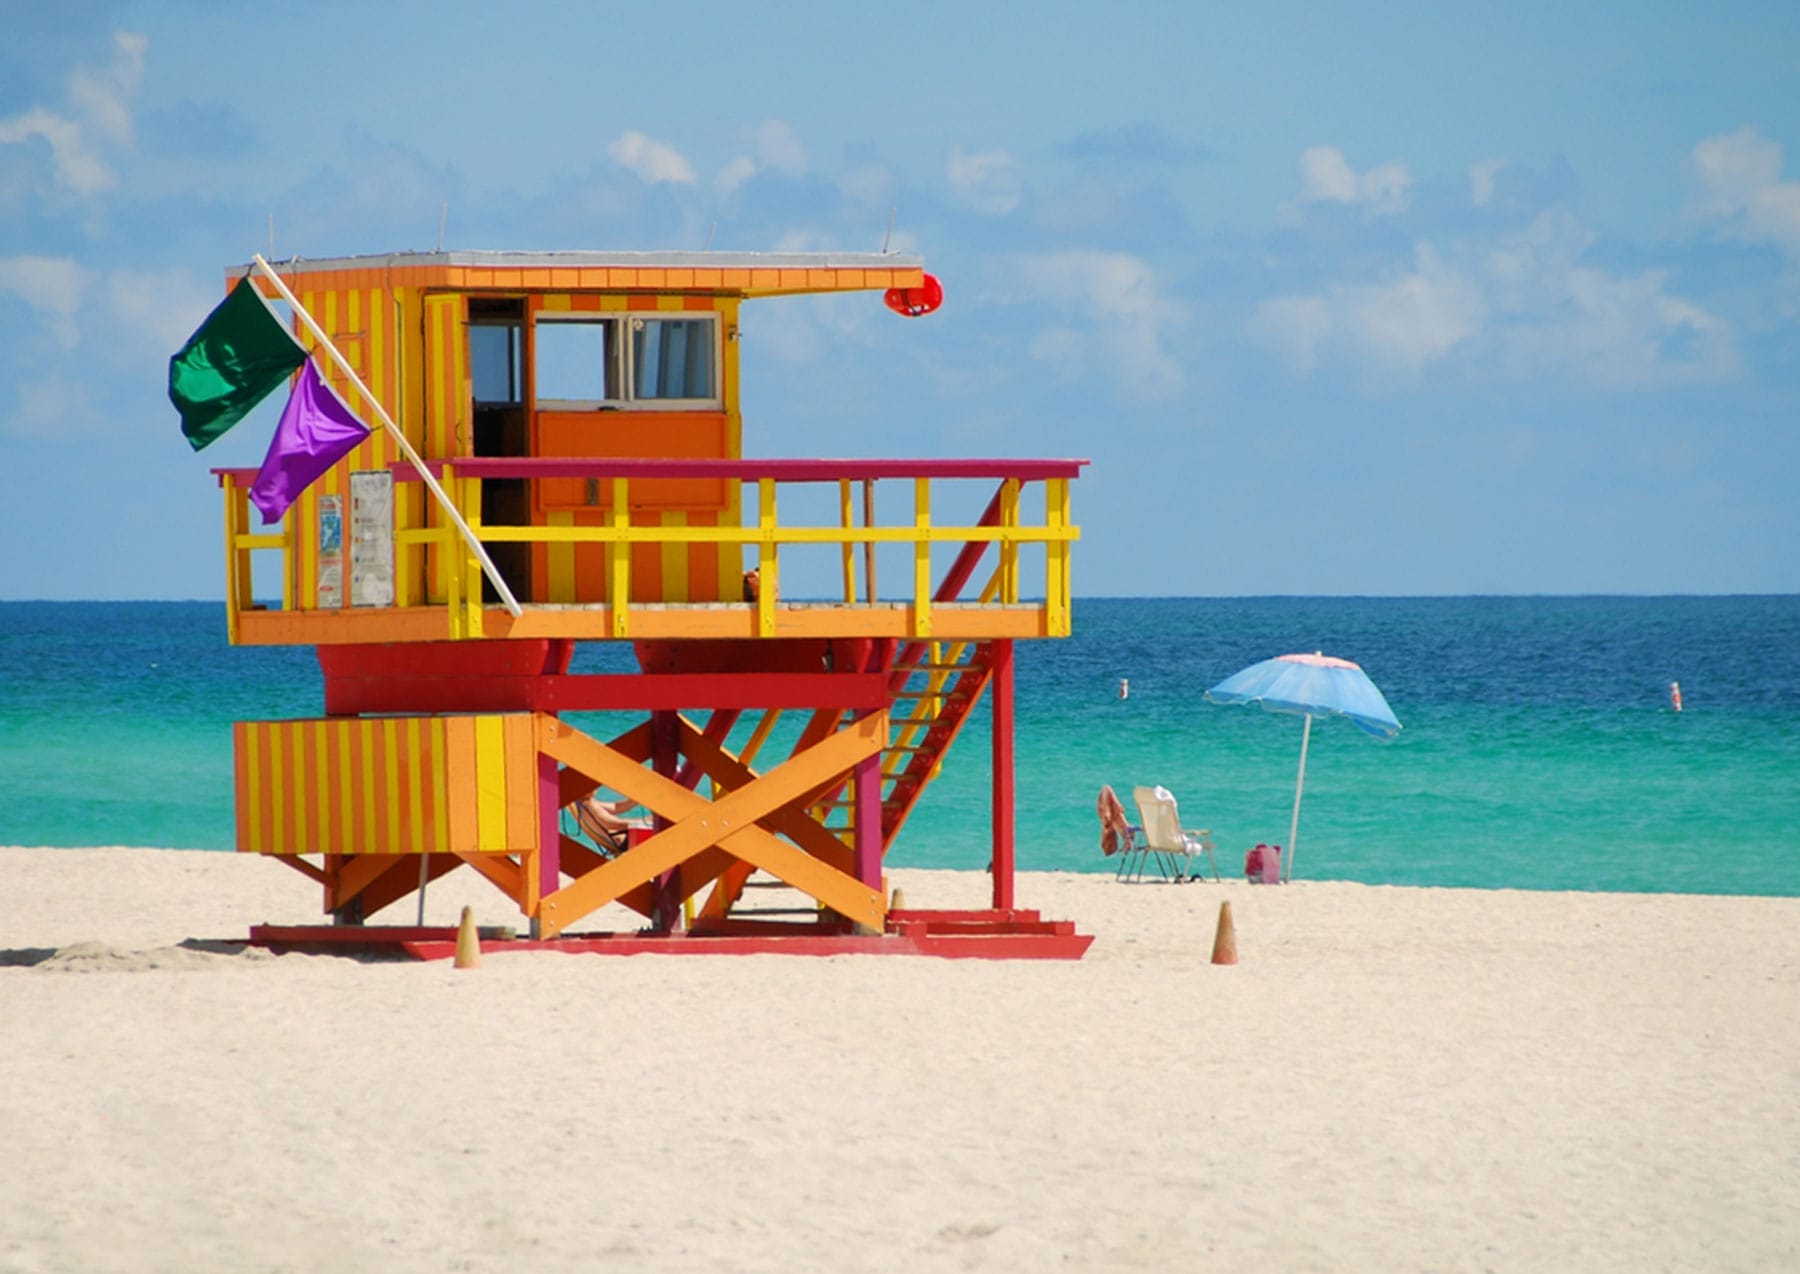 A colorful lifeguard tower stands on a sandy beach with calm turquoise water and a partly cloudy sky Nearby an umbrella and two beach chairs sit close to the water